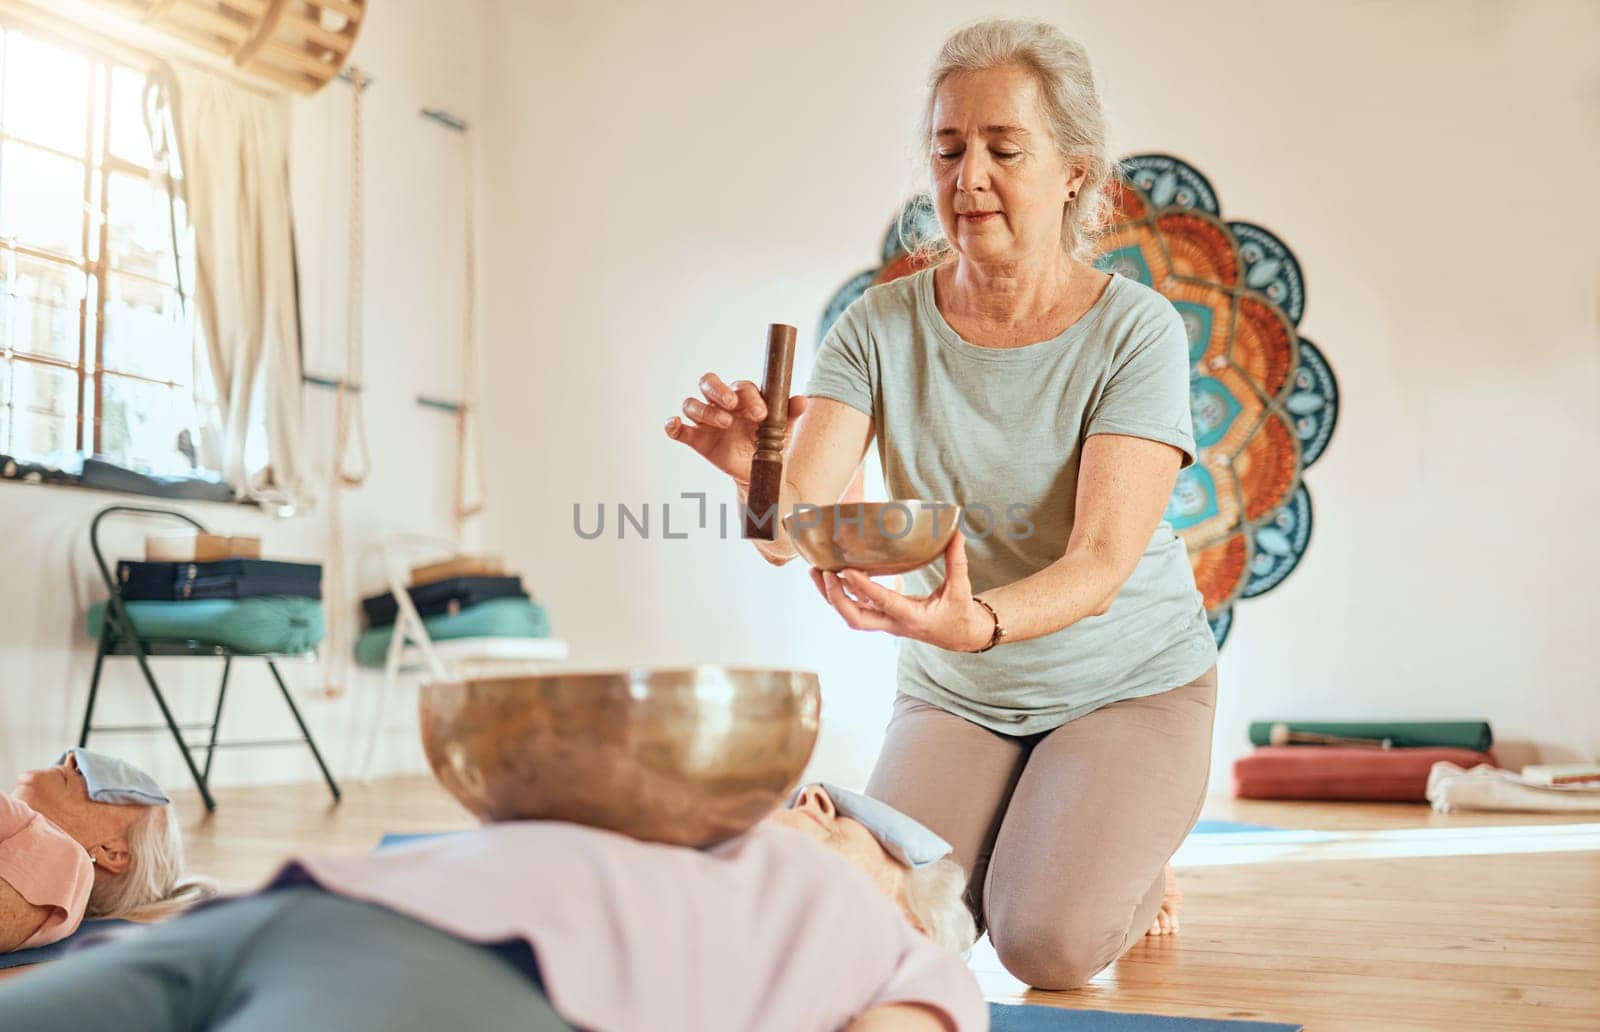 Meditation, tibetan bowl and zen senior women doing a sound healing or therapy practice in a studio. Peace, calm and elderly friends with a singing bowl for body and mind wellness, health and balance.